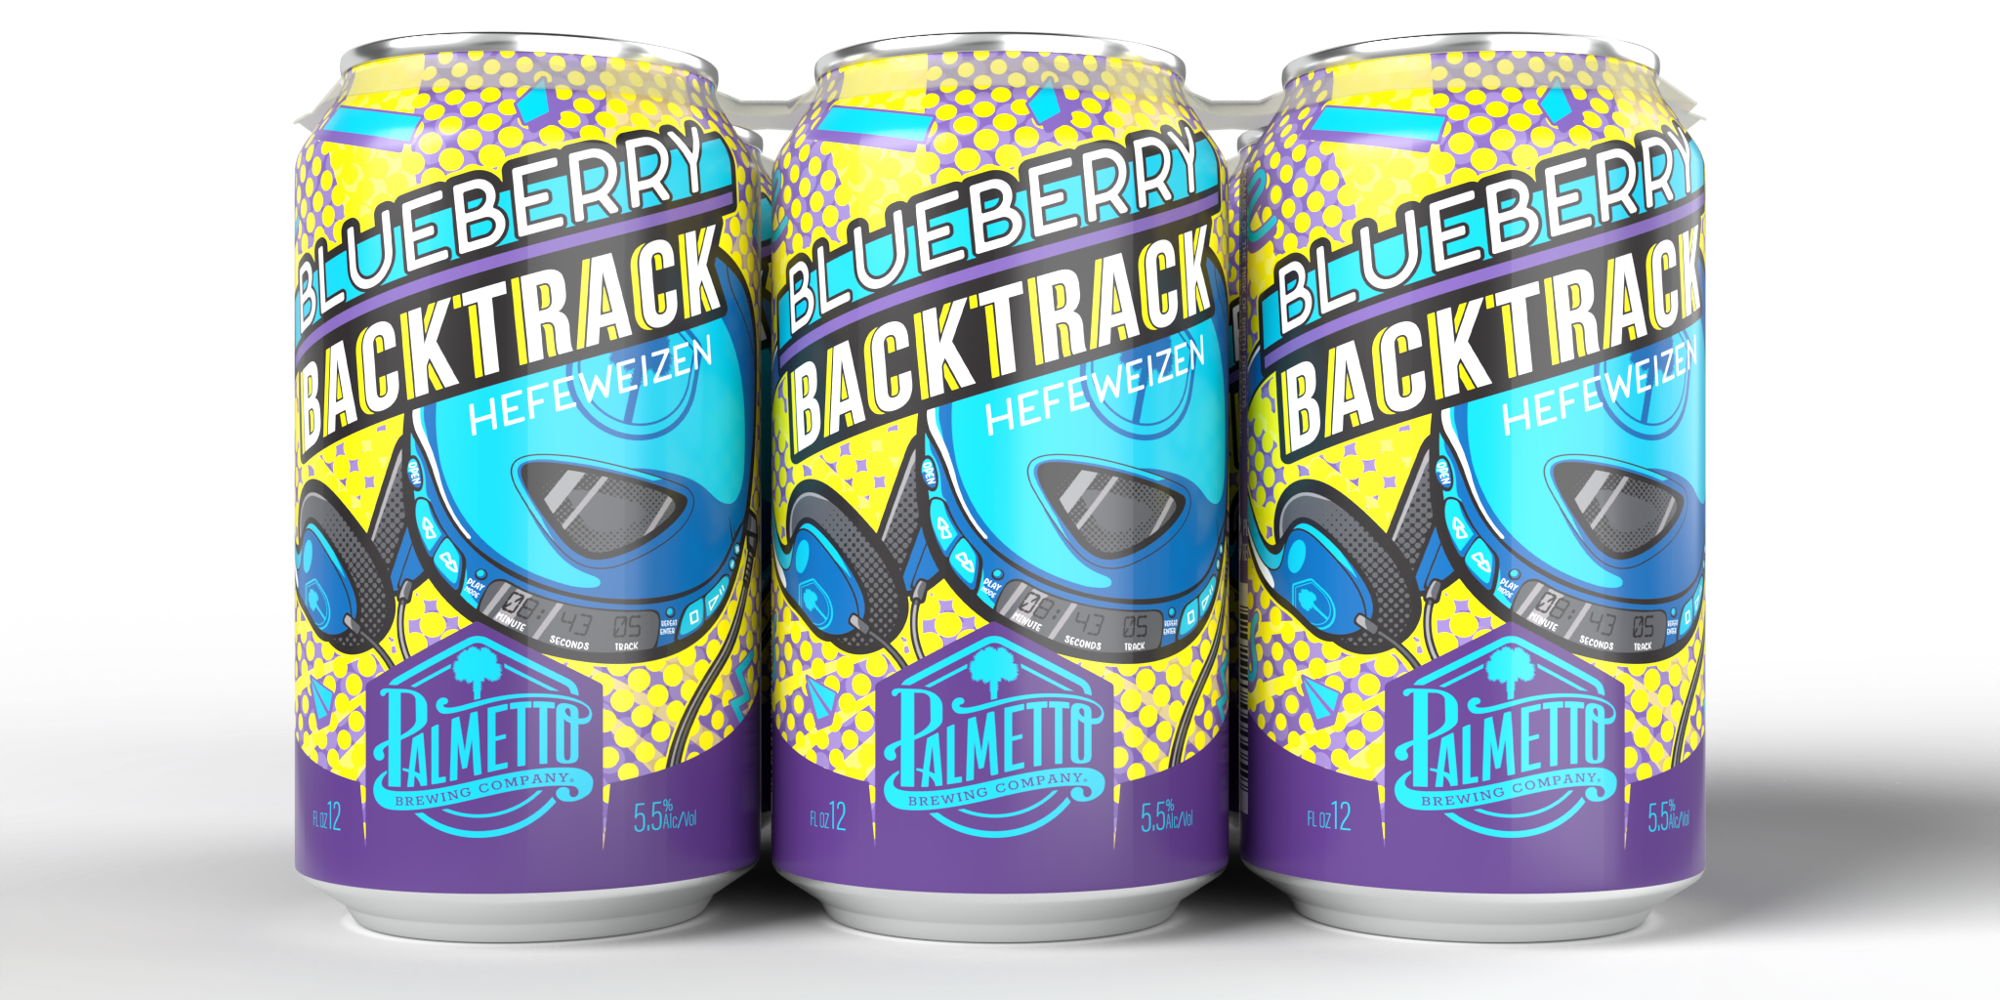 843 Series Release: Blueberry Backtrack Release promotional image